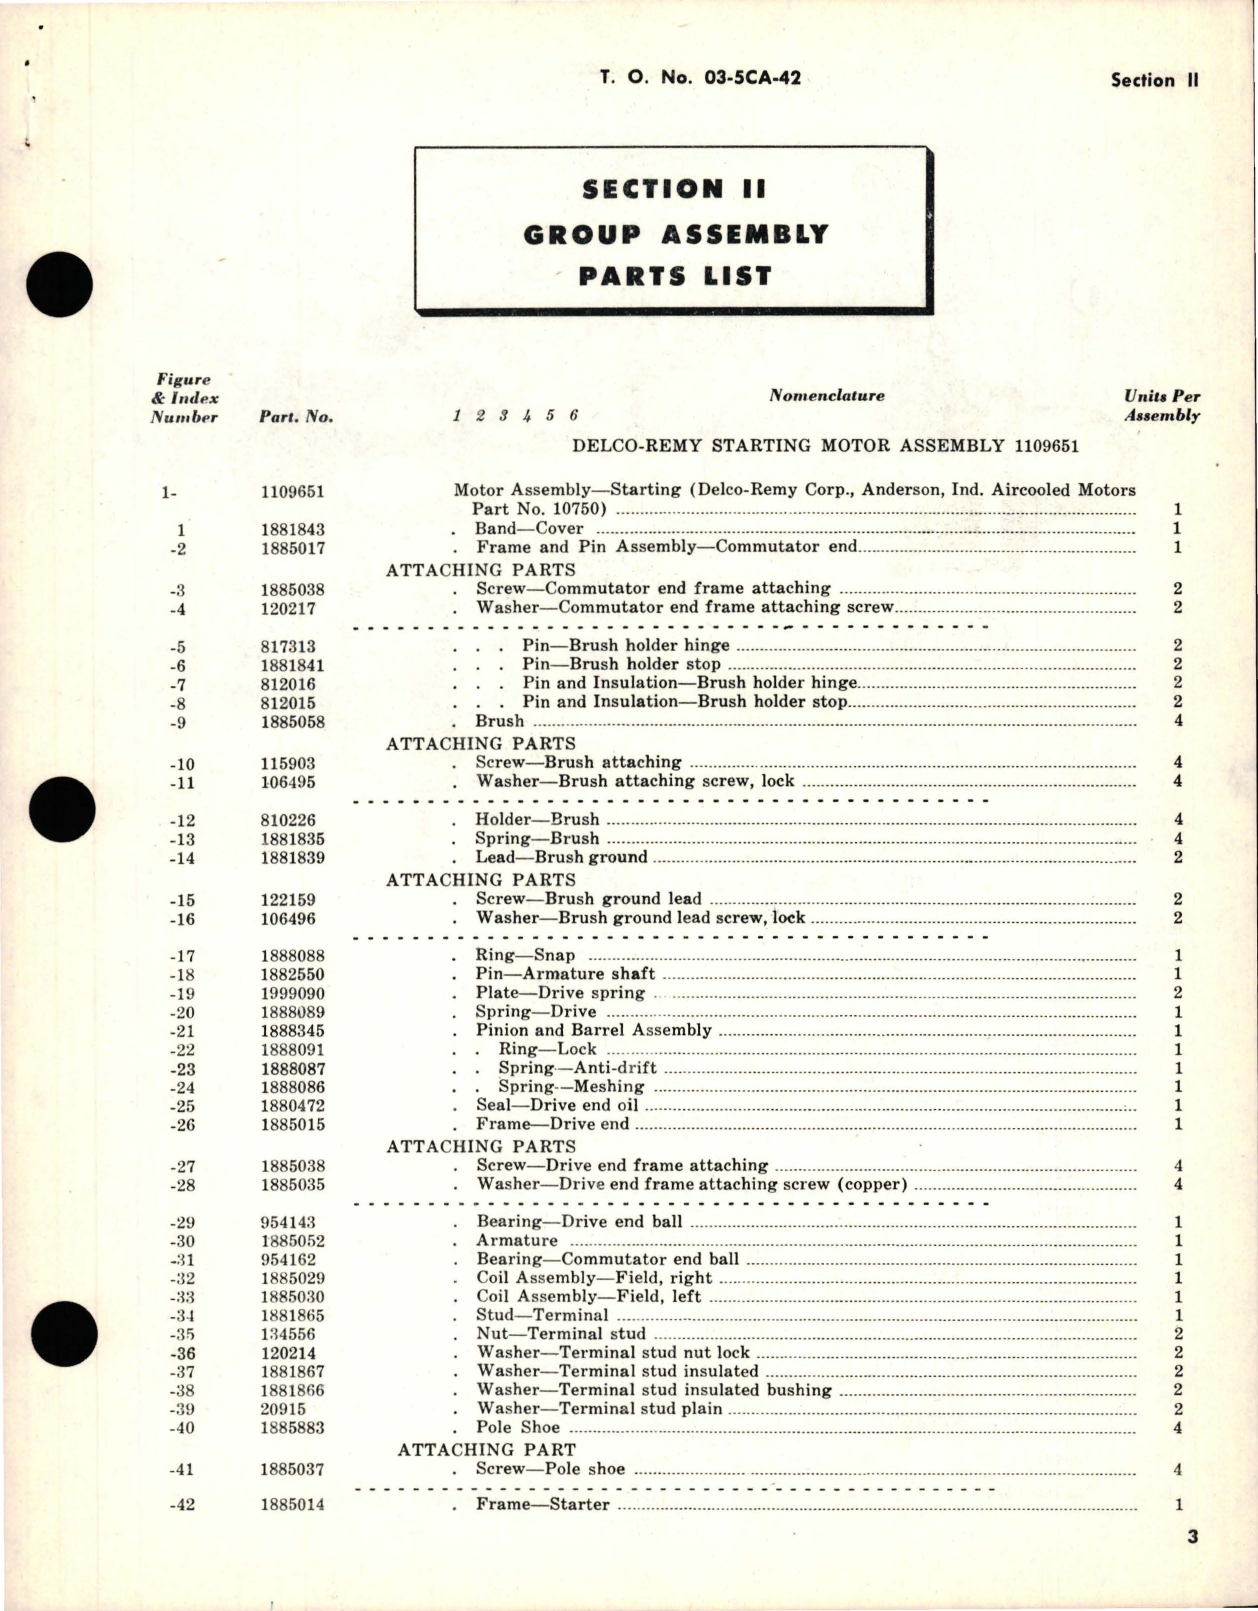 Sample page 5 from AirCorps Library document: Parts Catalog for Starting Motors - Parts 1109651 and 1109662